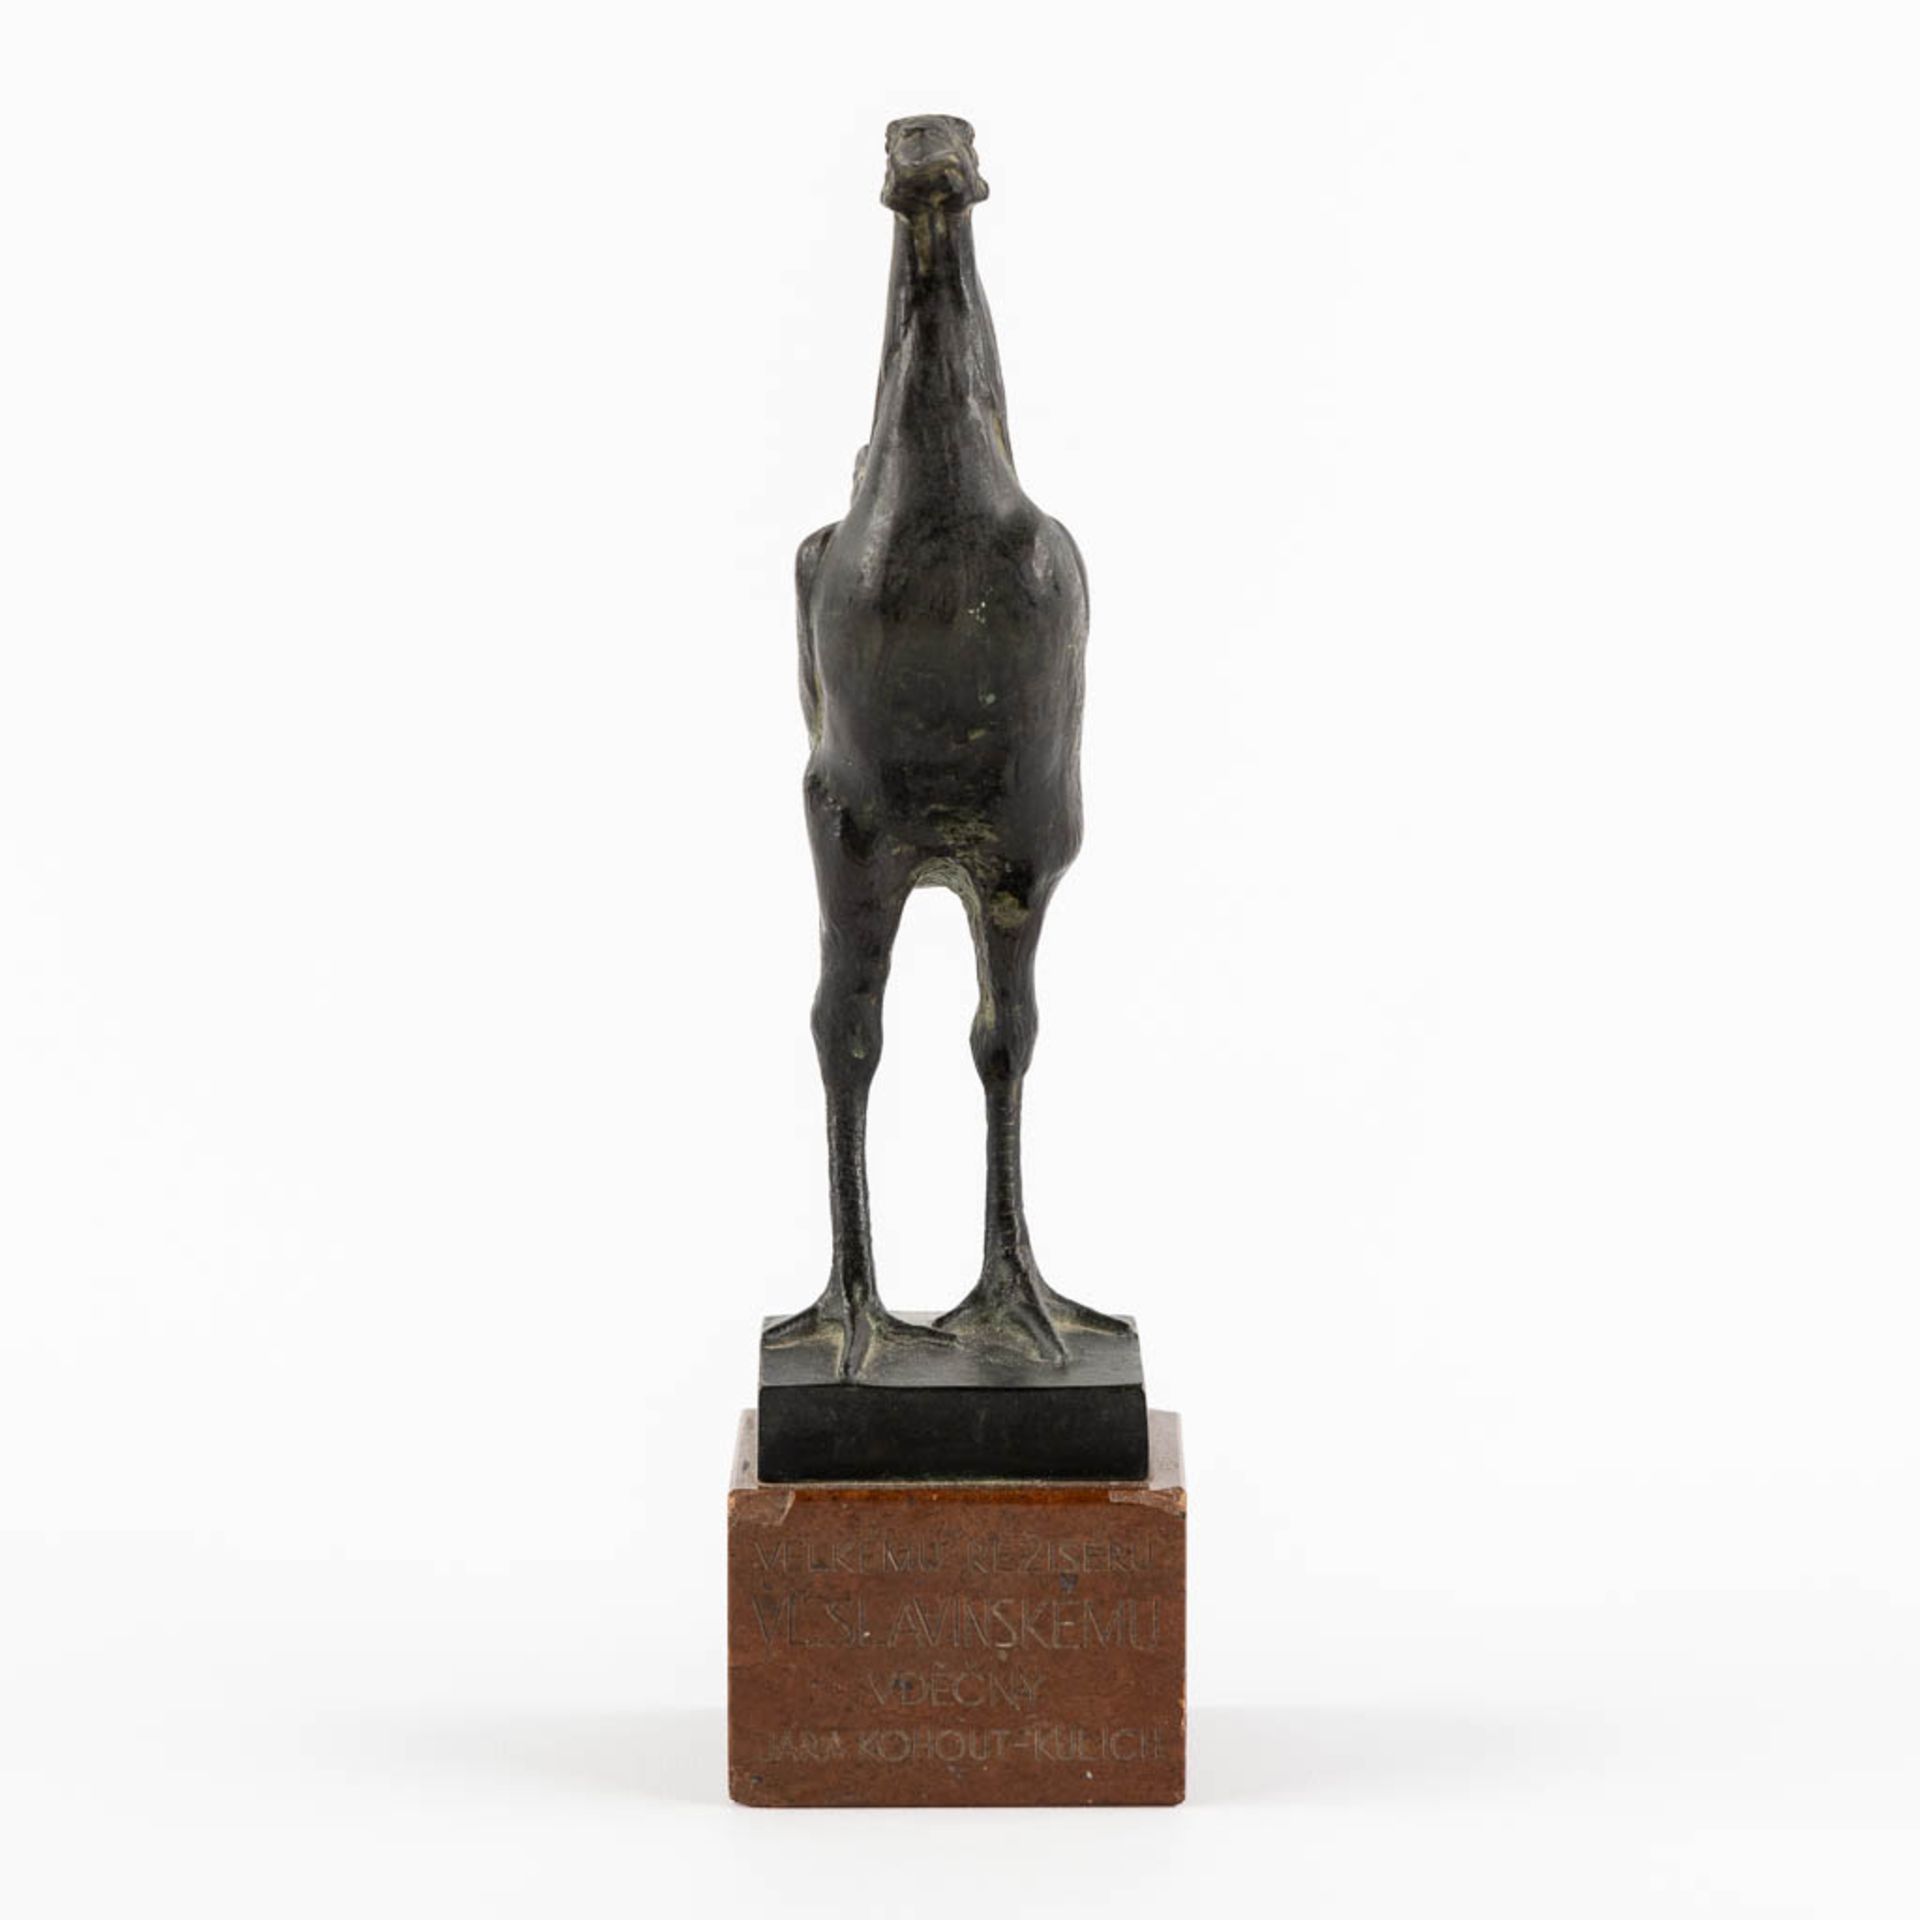 K. STACHOWSKY (XIX-XX) 'Rooster' patinated bronze on marble. (L:15 x W:7 x H:26 cm) - Image 3 of 11